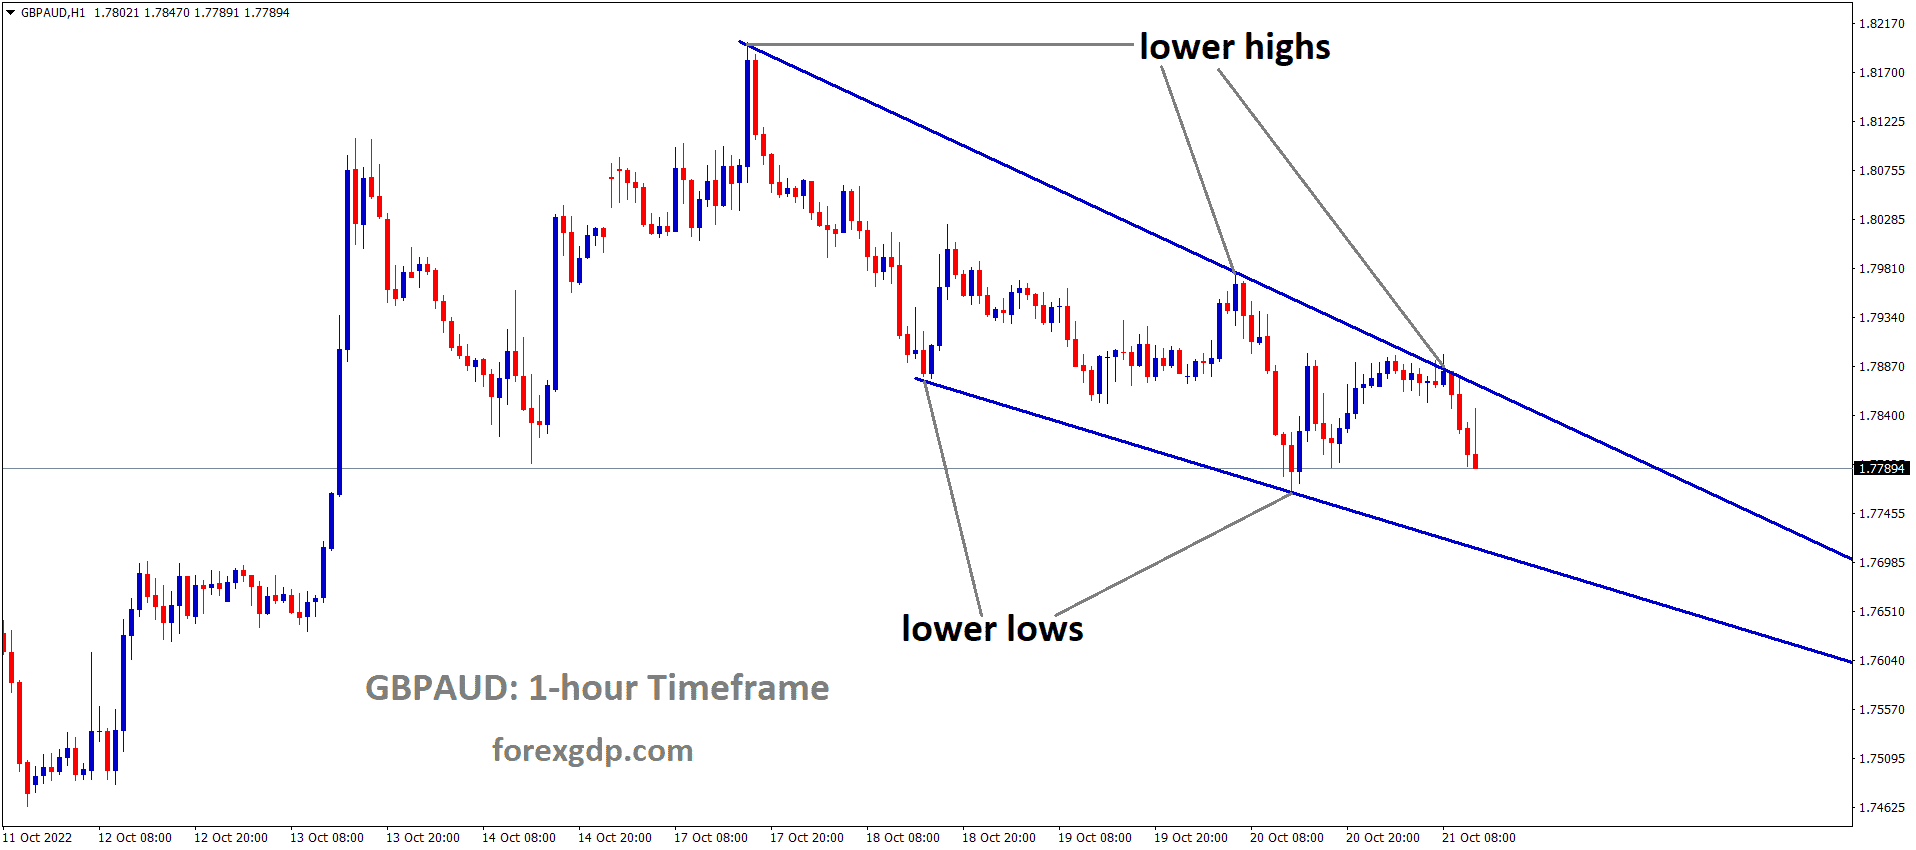 GBPAUD is moving in the Falling wedge pattern and the market has fallen from the lower high area of the pattern